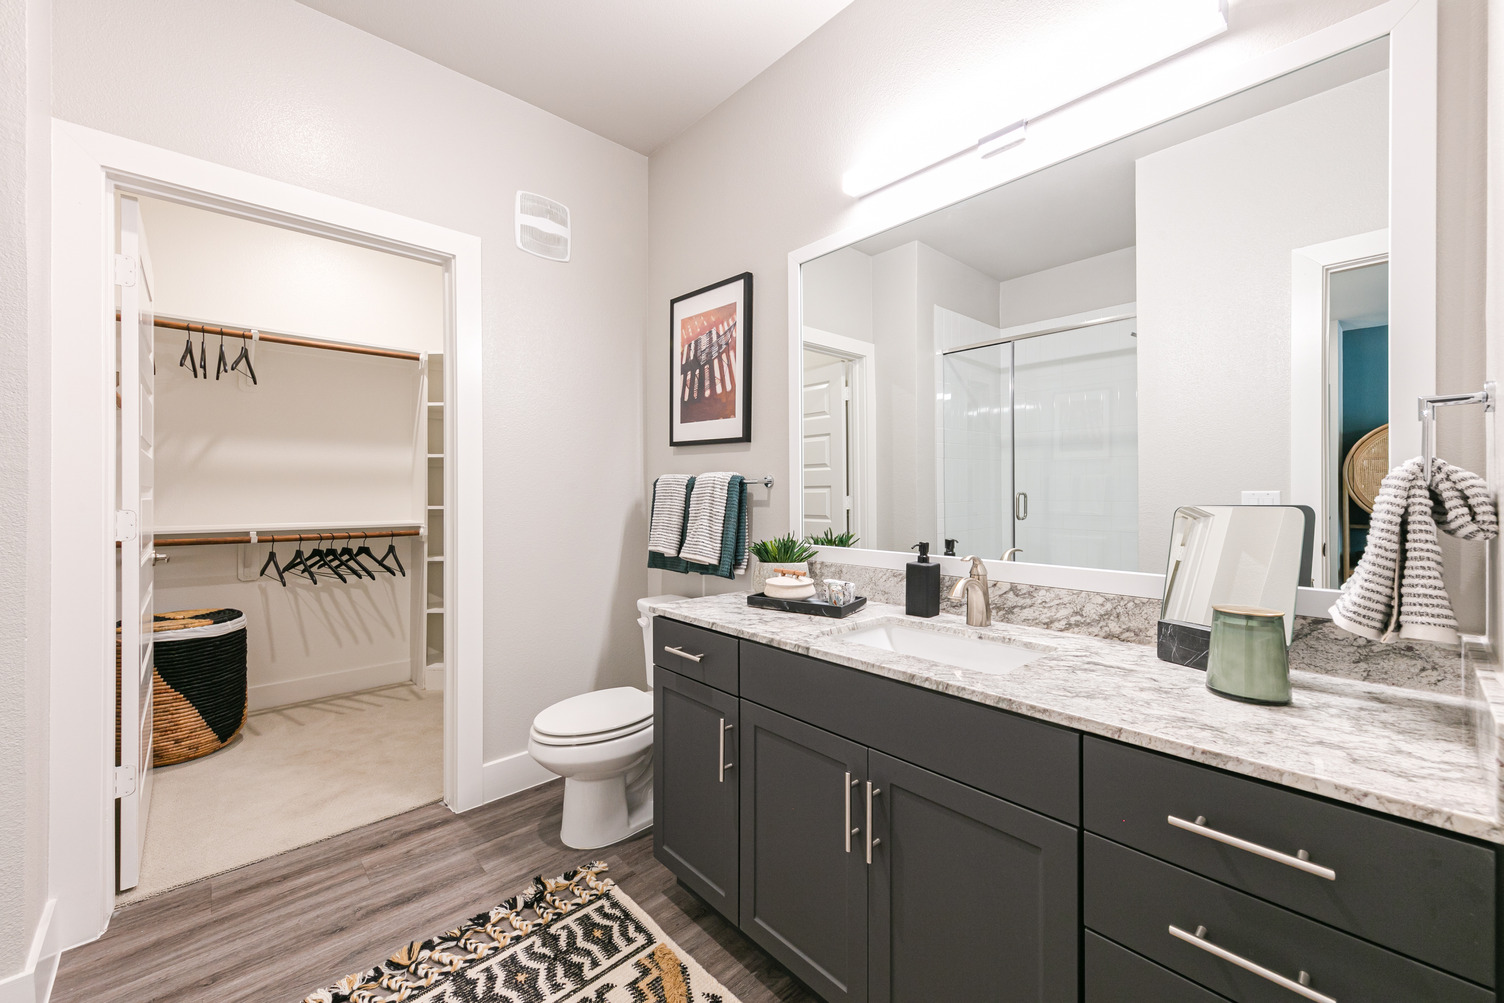 Model apartment bathroom with quartz countertop, framed glass mirror, and walk-in closet with shelving